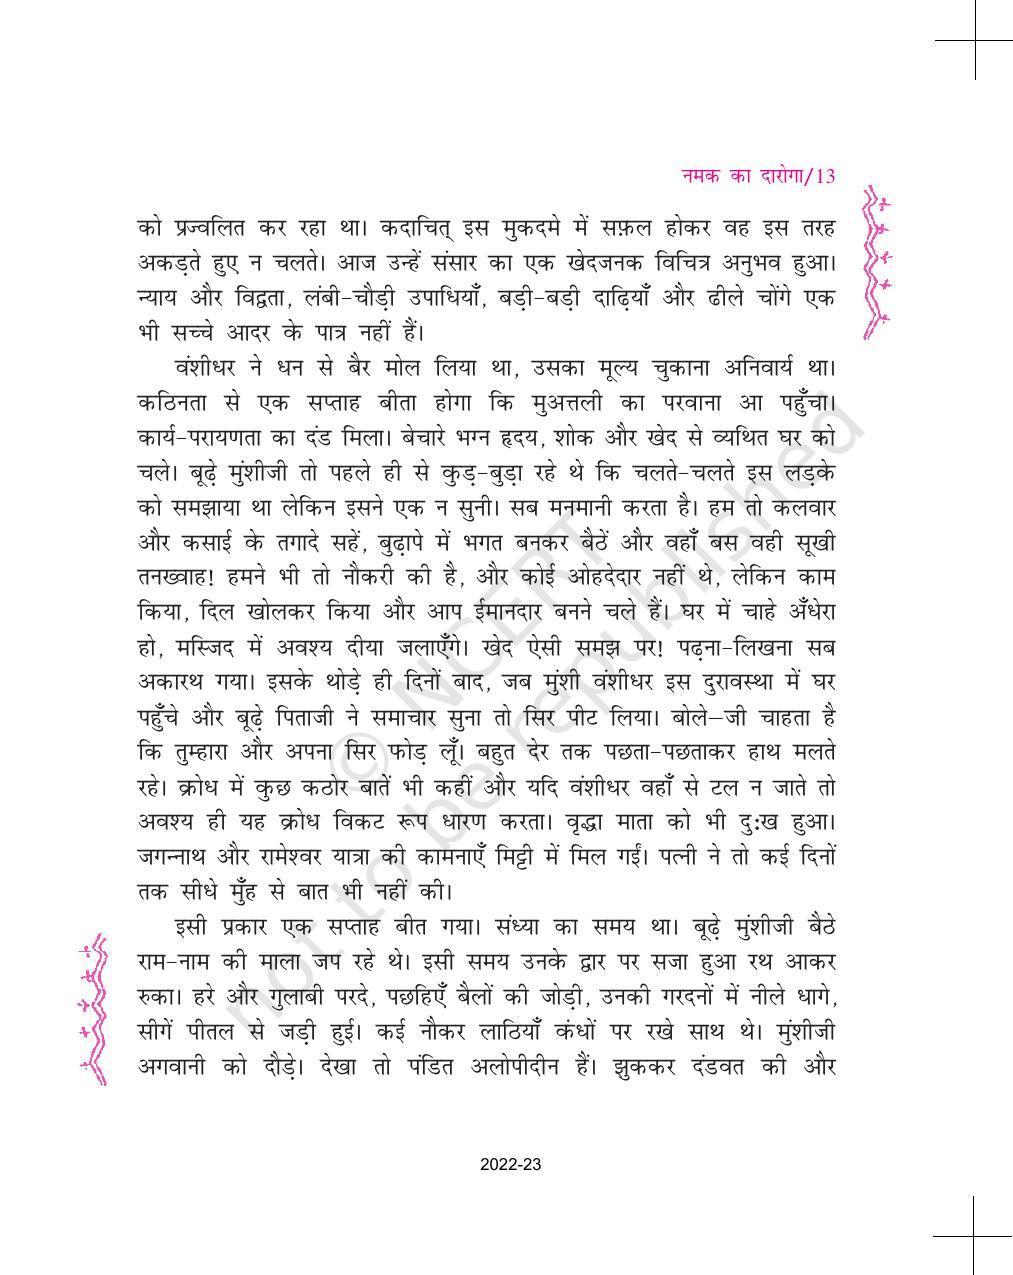 NCERT Book for Class 11 Hindi Aroh Chapter 1 नमक का दारोगा - Page 13